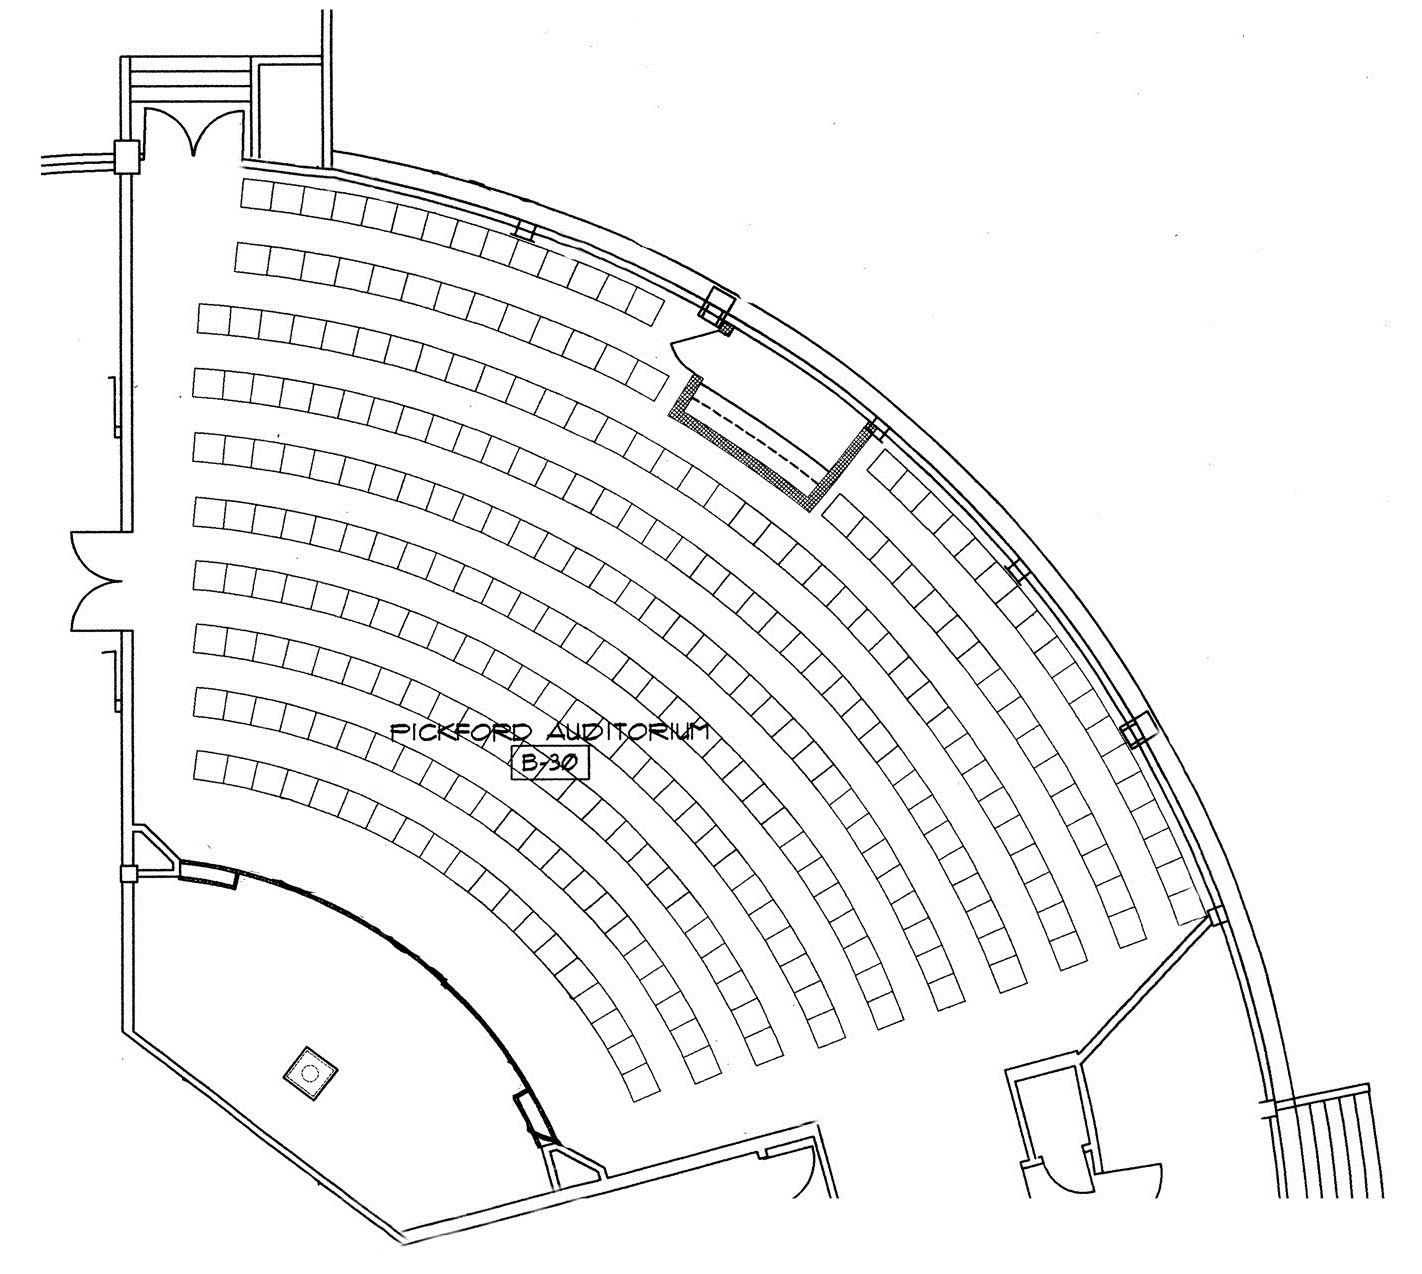 Seating chart of Pickford Auditorium